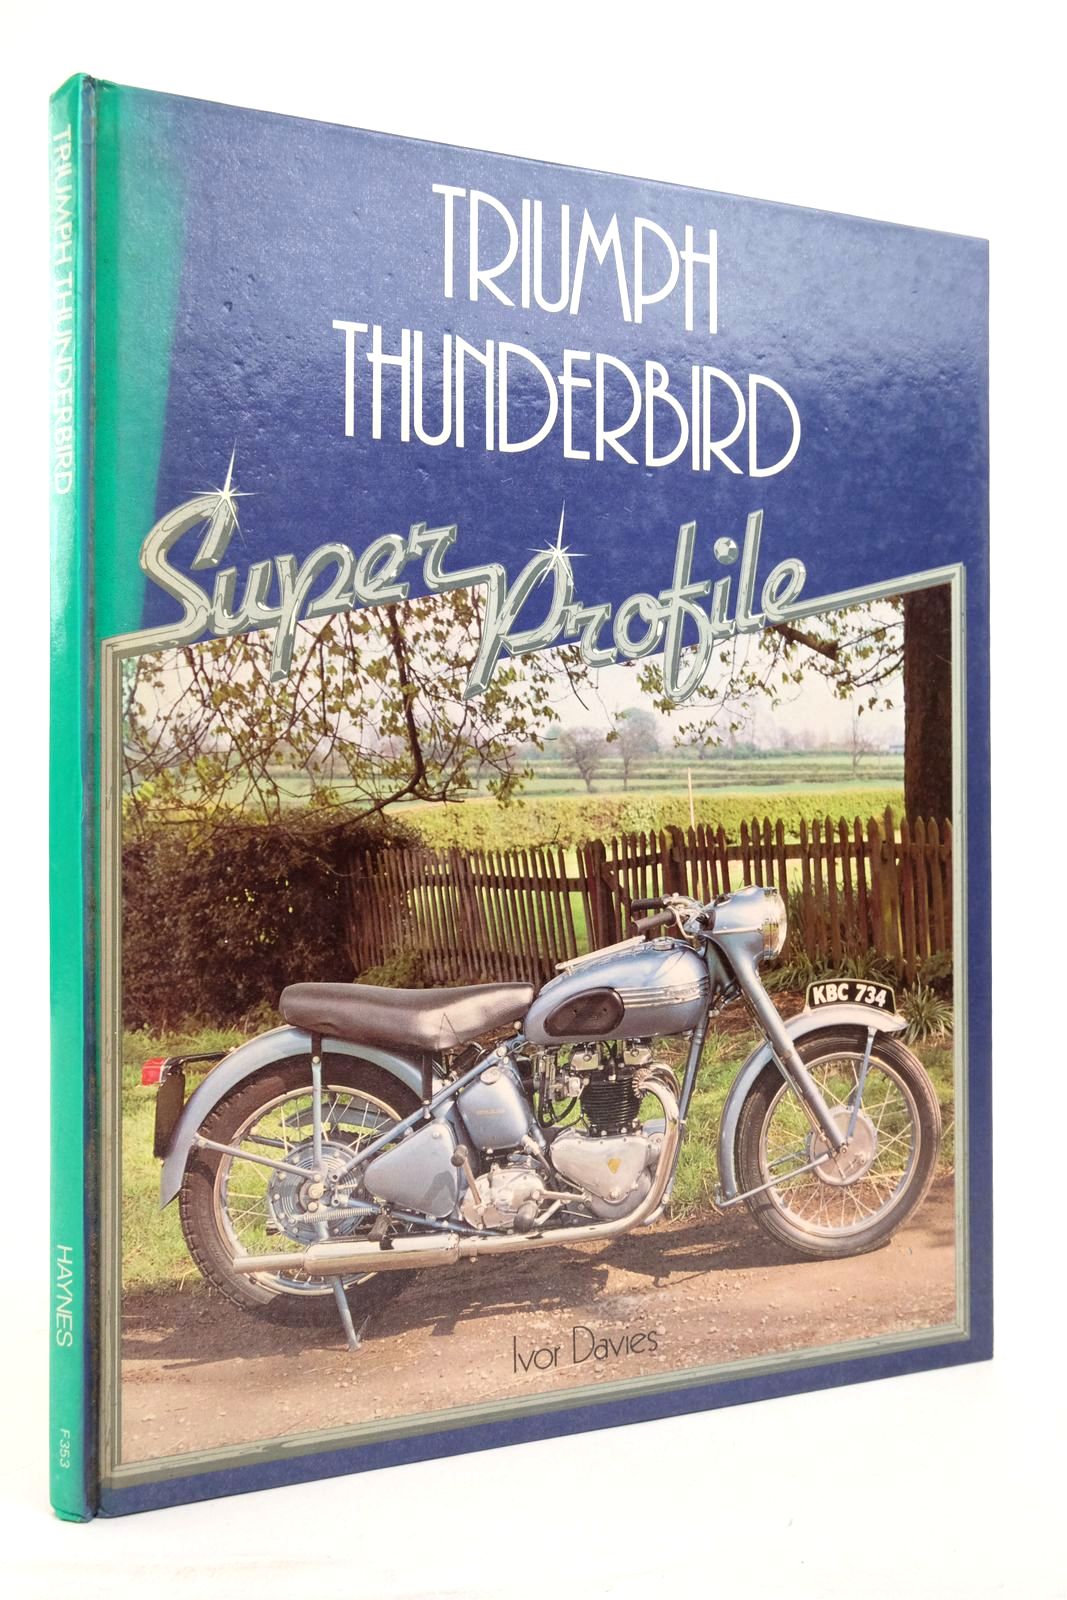 Photo of TRIUMPH THUNDERBIRD written by Davies, Ivor published by Haynes Publishing Group (STOCK CODE: 2136781)  for sale by Stella & Rose's Books